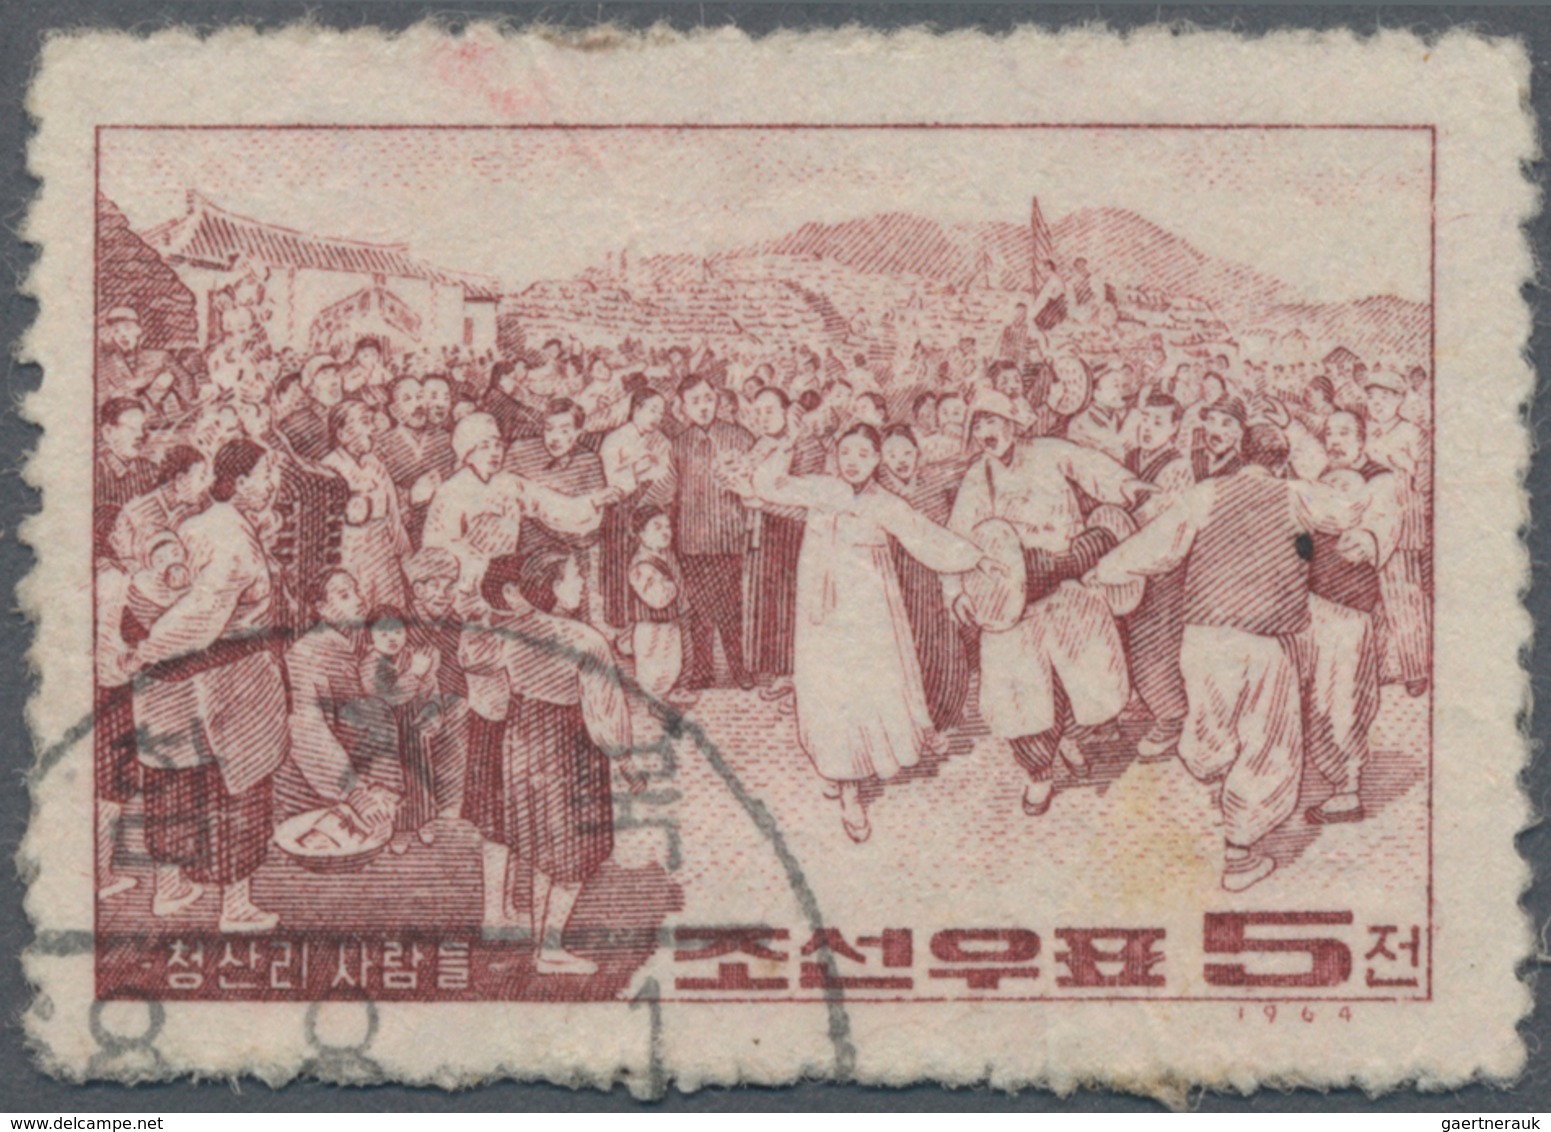 Korea-Nord: 1968, 5 Ch. Brown Unissued, But Canc. 1968.8.1, Some Pieces Were Sold By P.o. In In Hamk - Korea, North